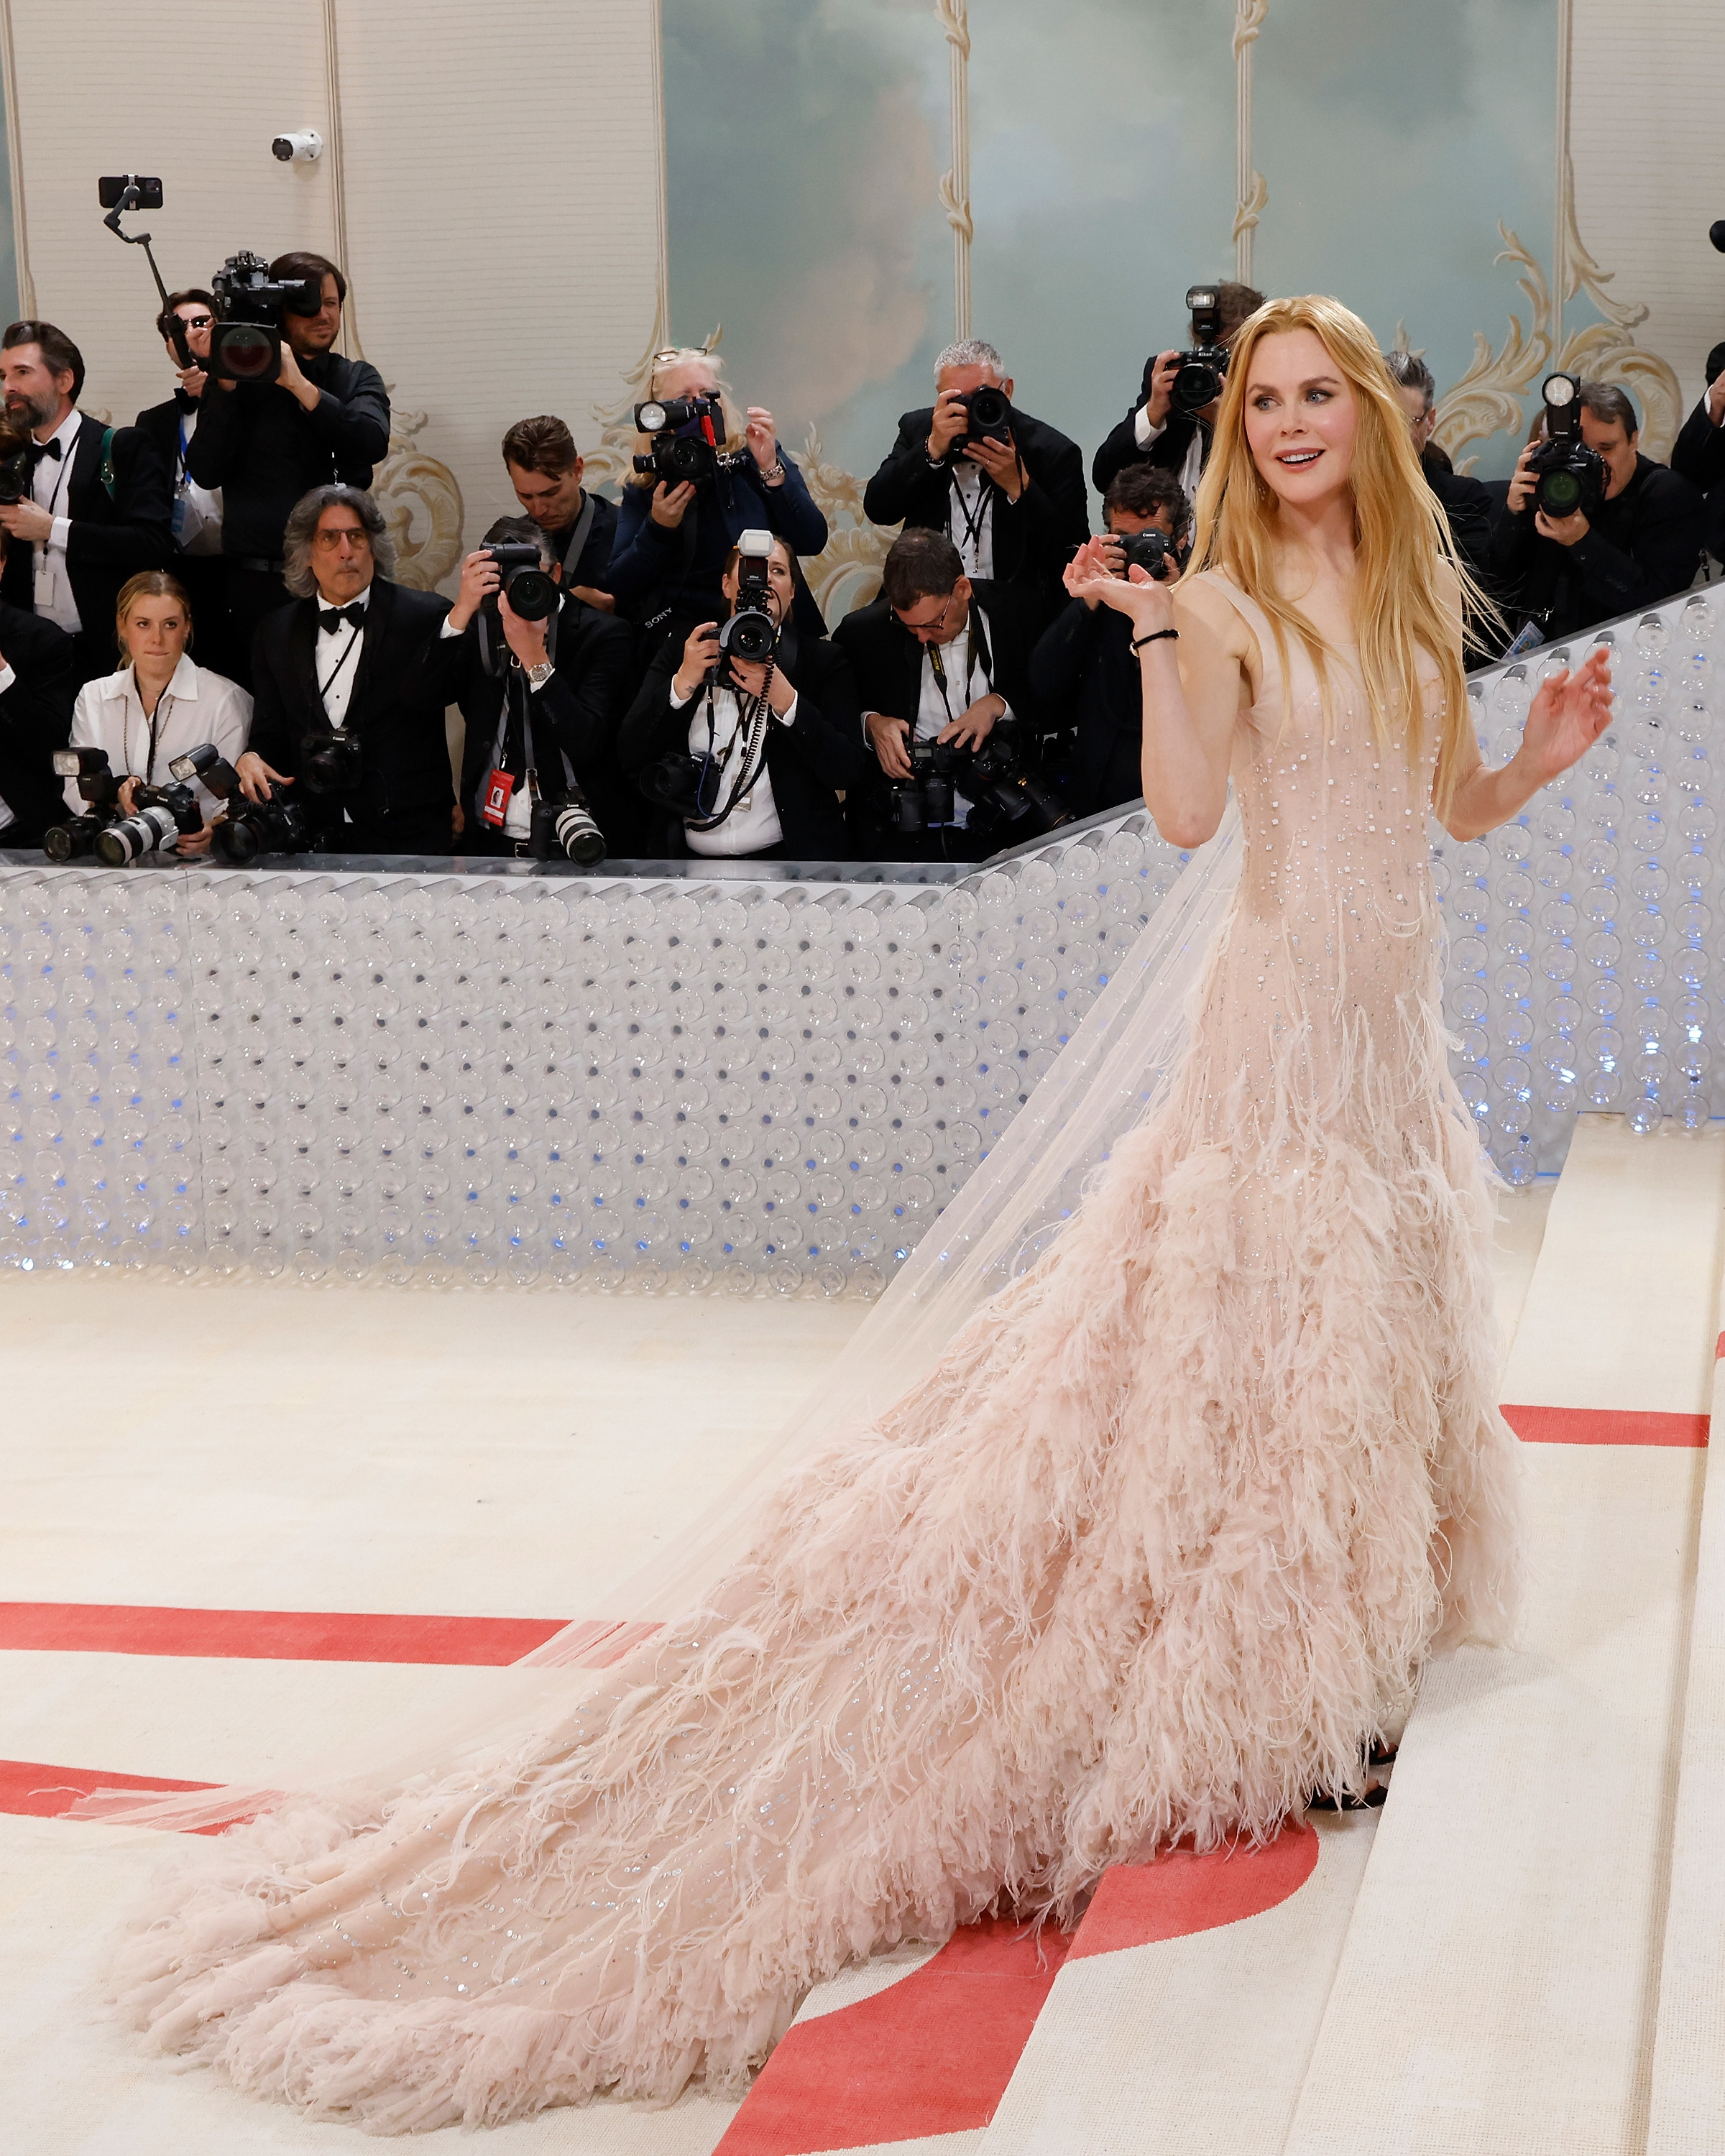 Nicole Kidman in an elegant gown with a long feathery train, waving, with photographers in the background